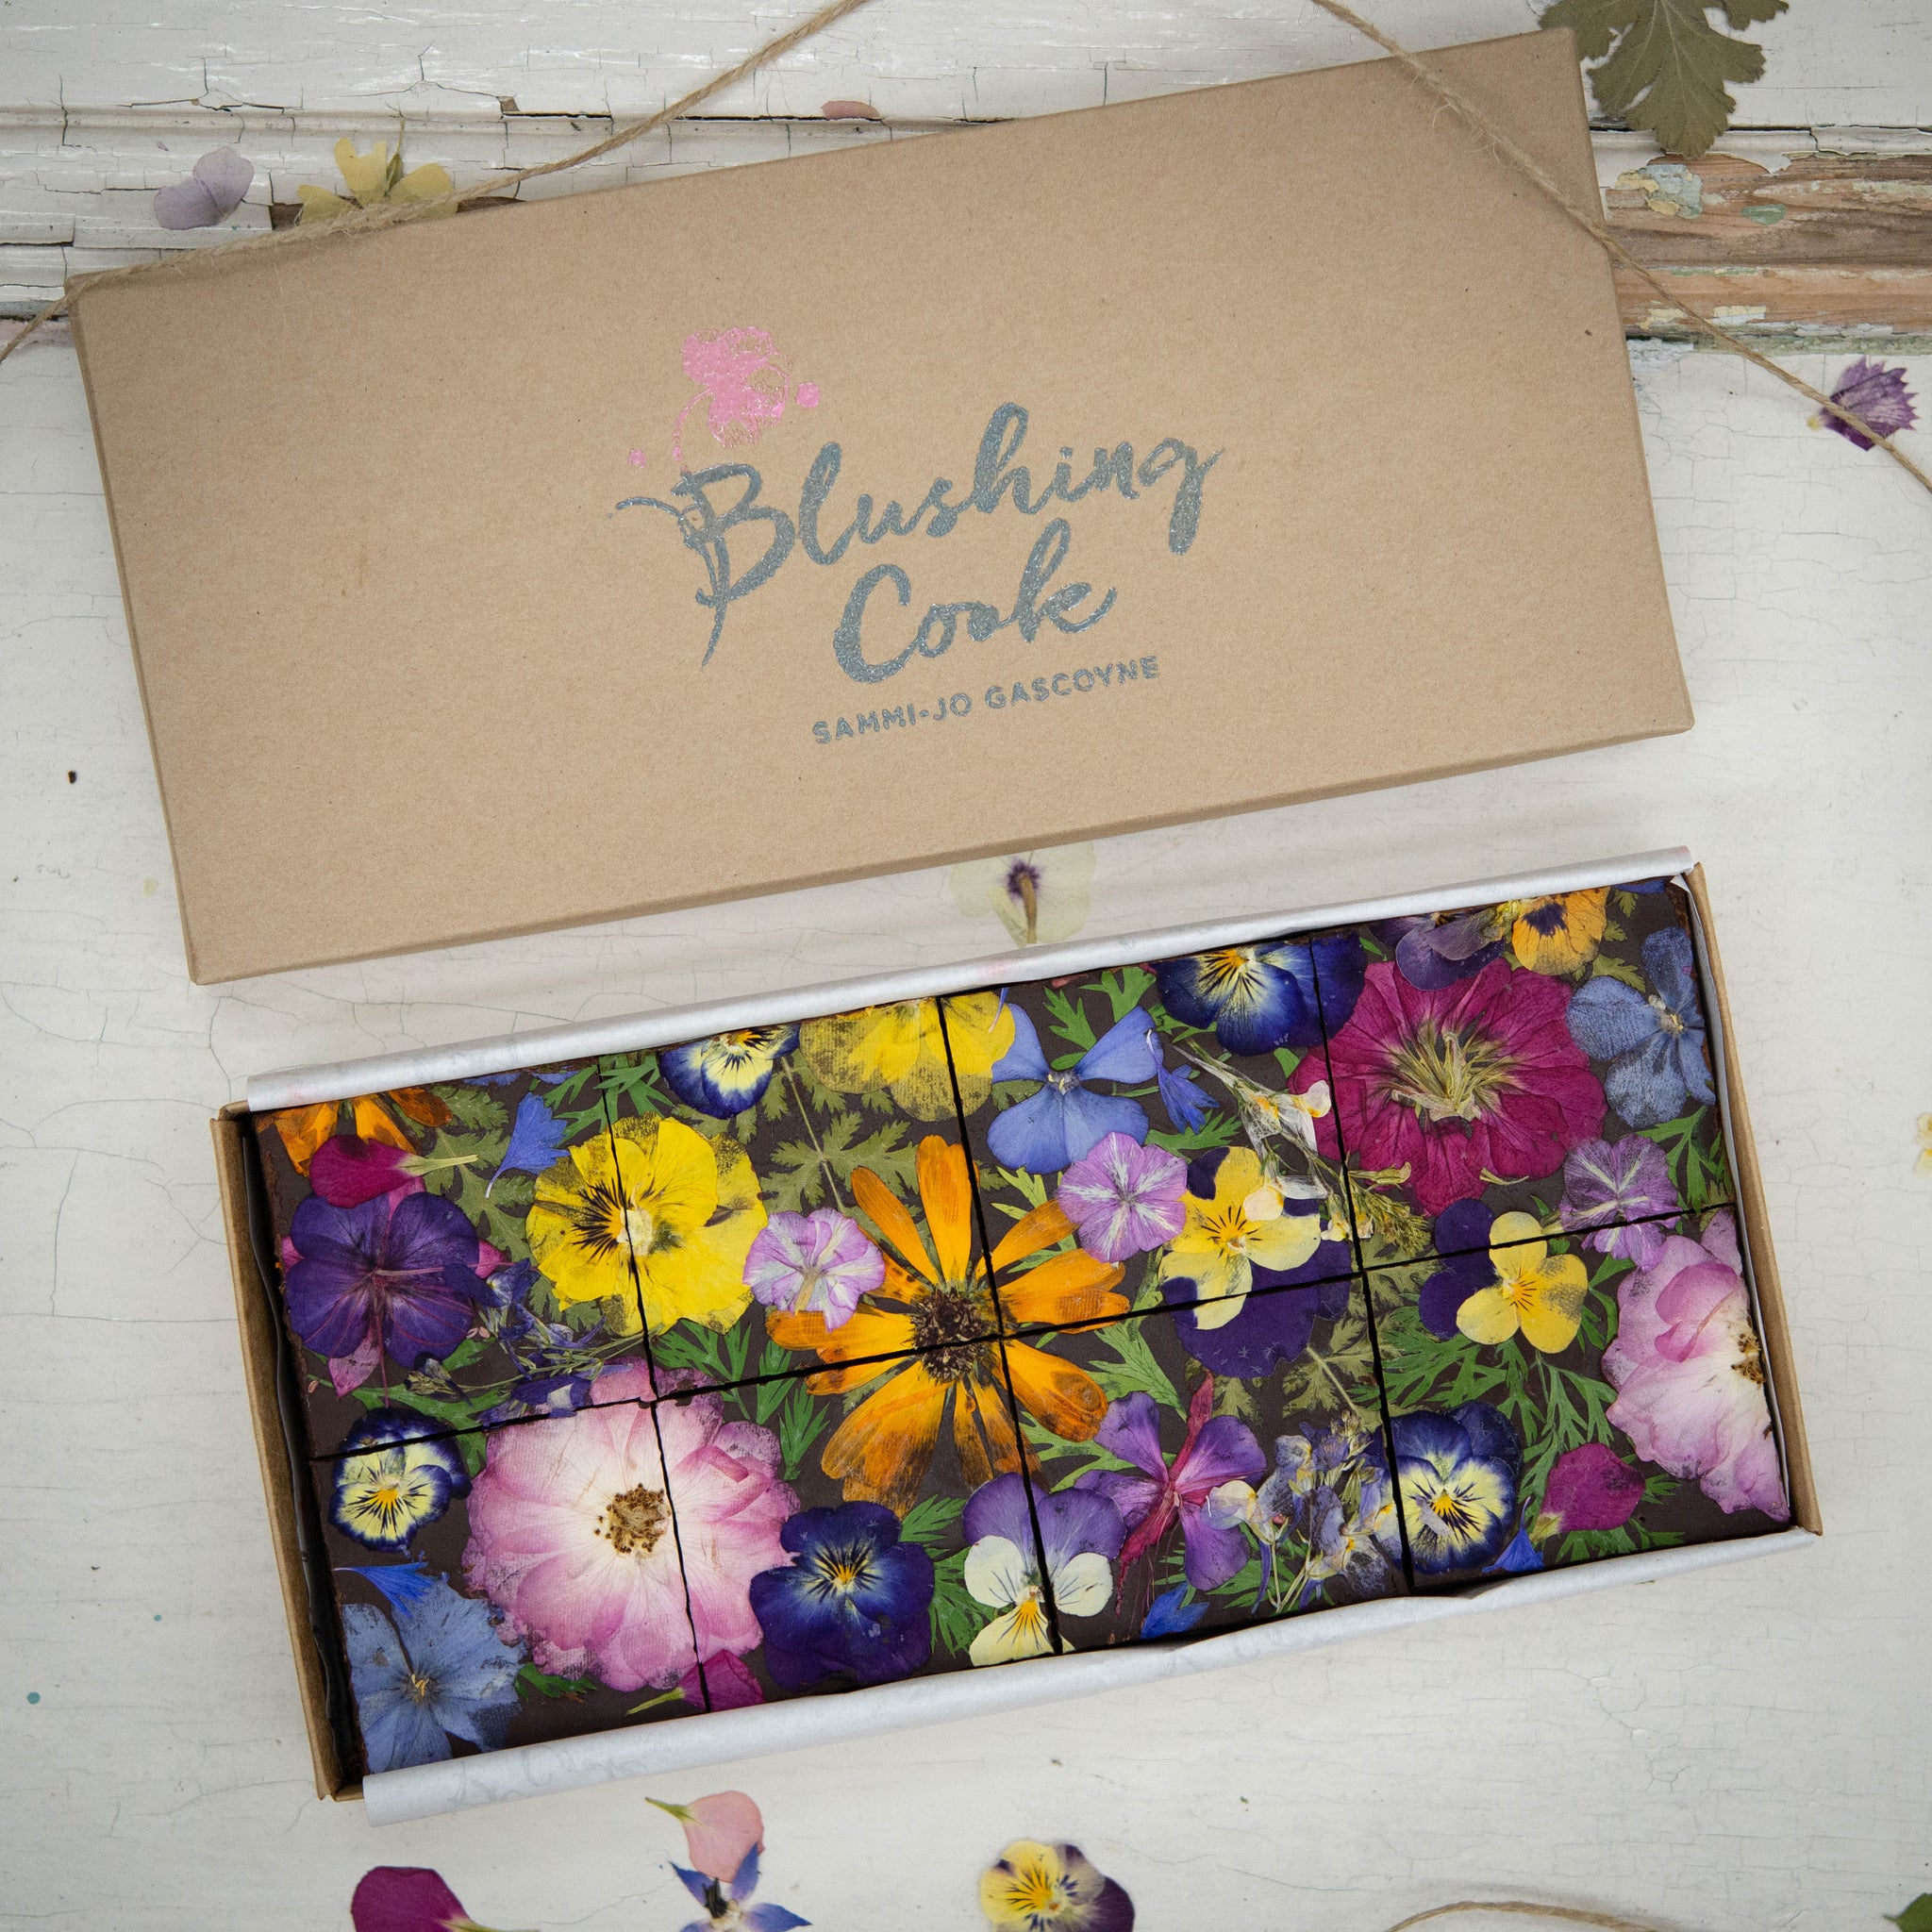 Gluten-free floral brownies - Double chocolate classic